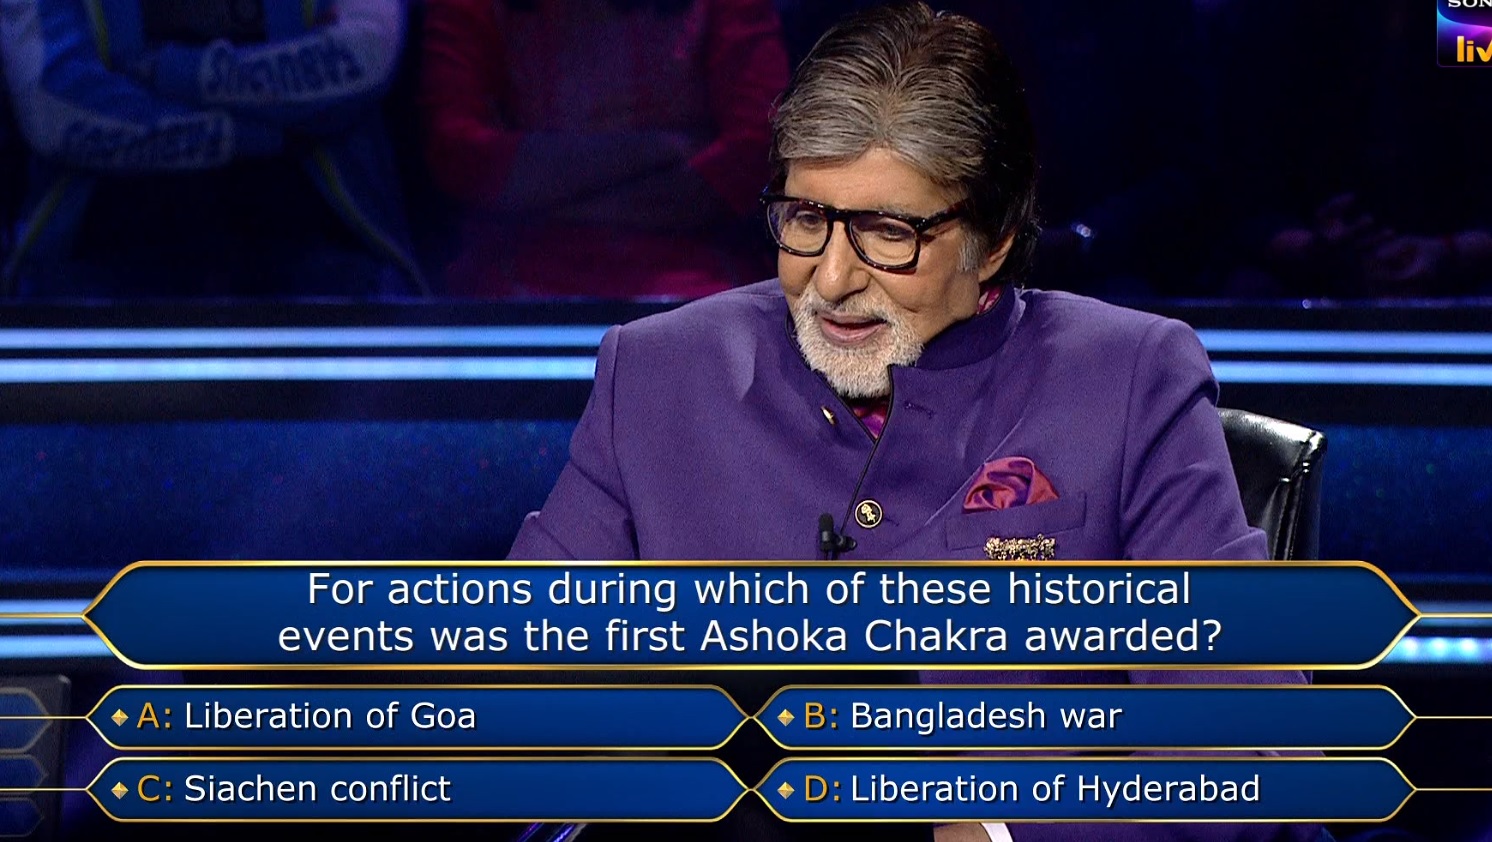 Ques : For actions during which of these historical events was the first Ashoka Chakra awarded?